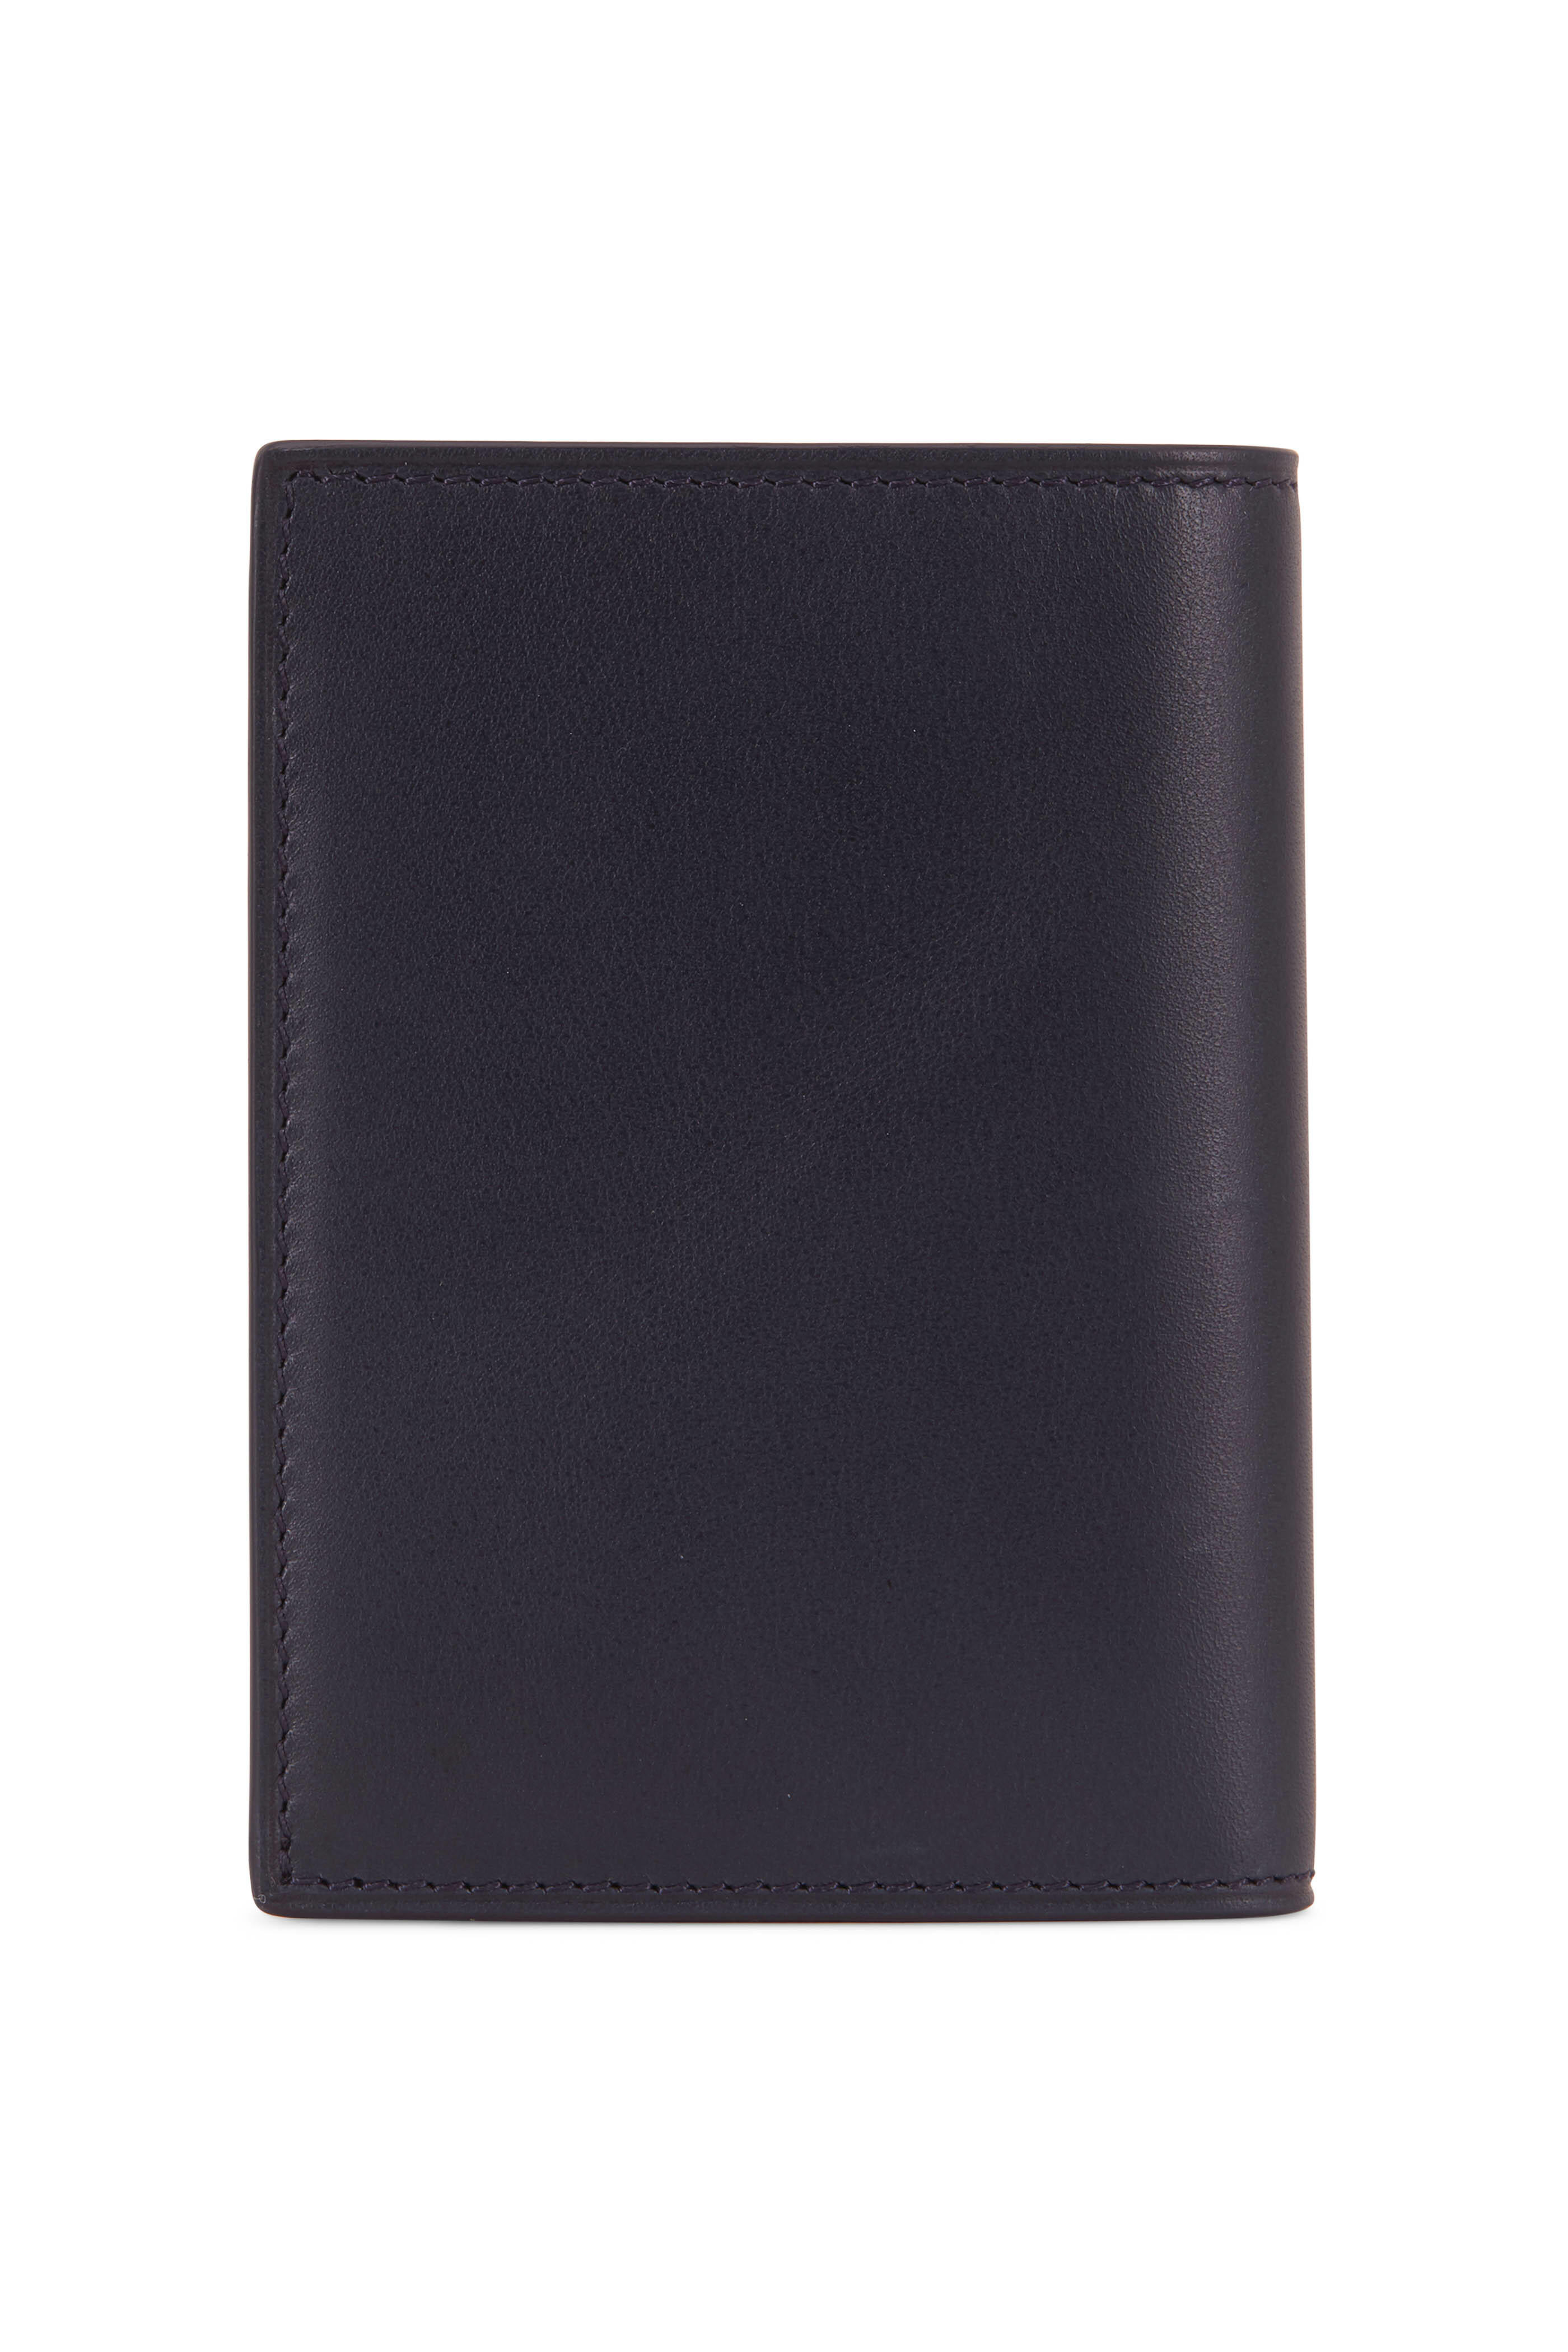 Dunhill - Duke Ink Blue Leather Business Card Case